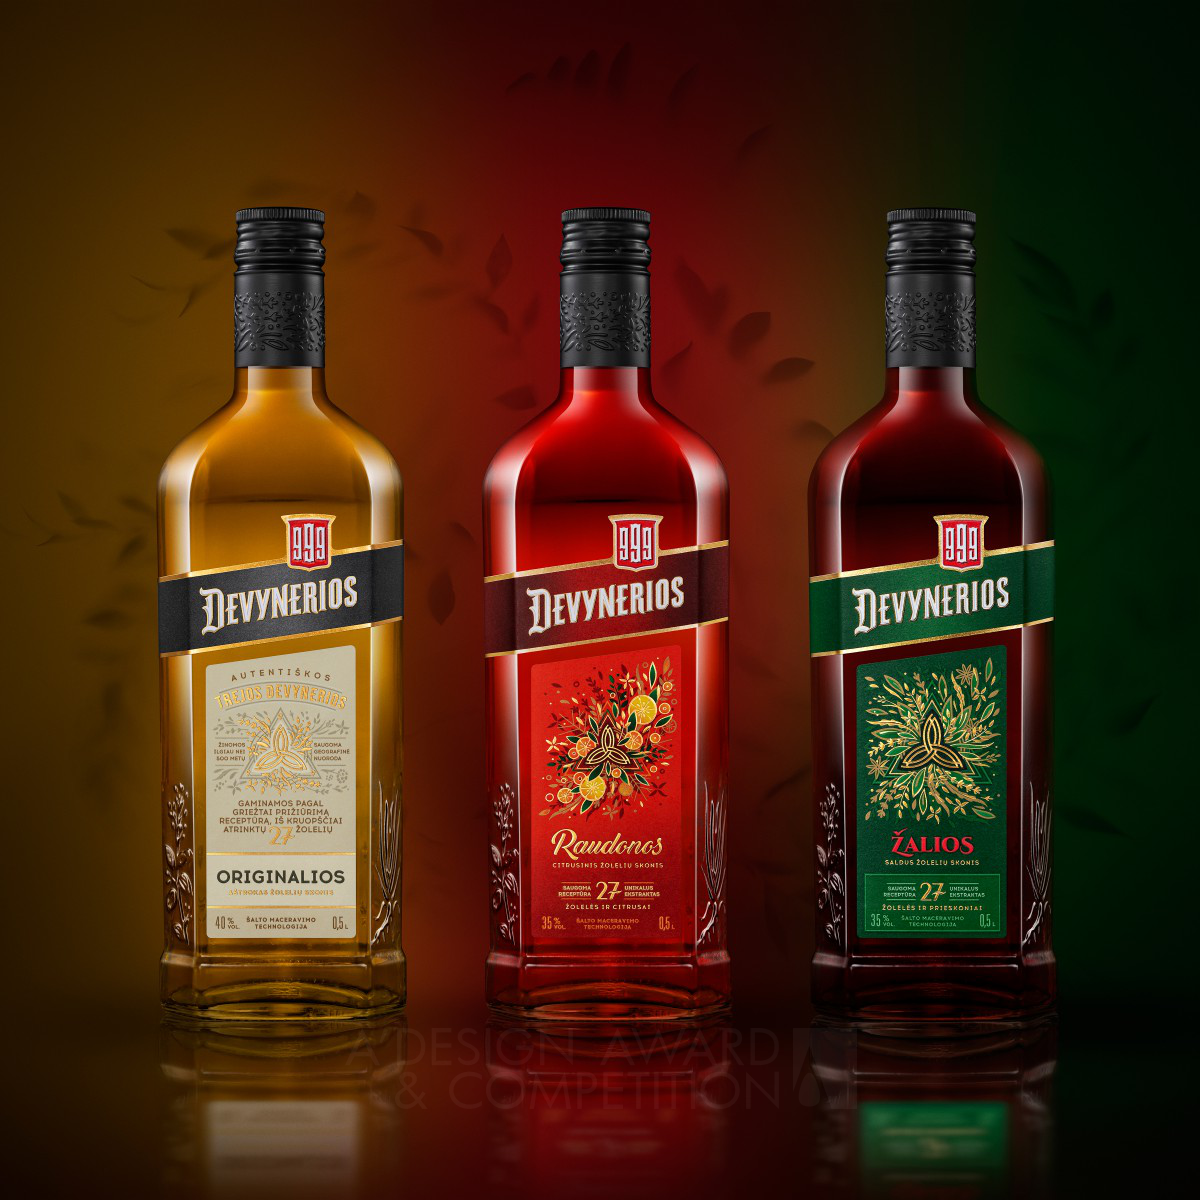 Devynerios Label Designs Reflect Lithuania's Mysticism and Natural Ingredients